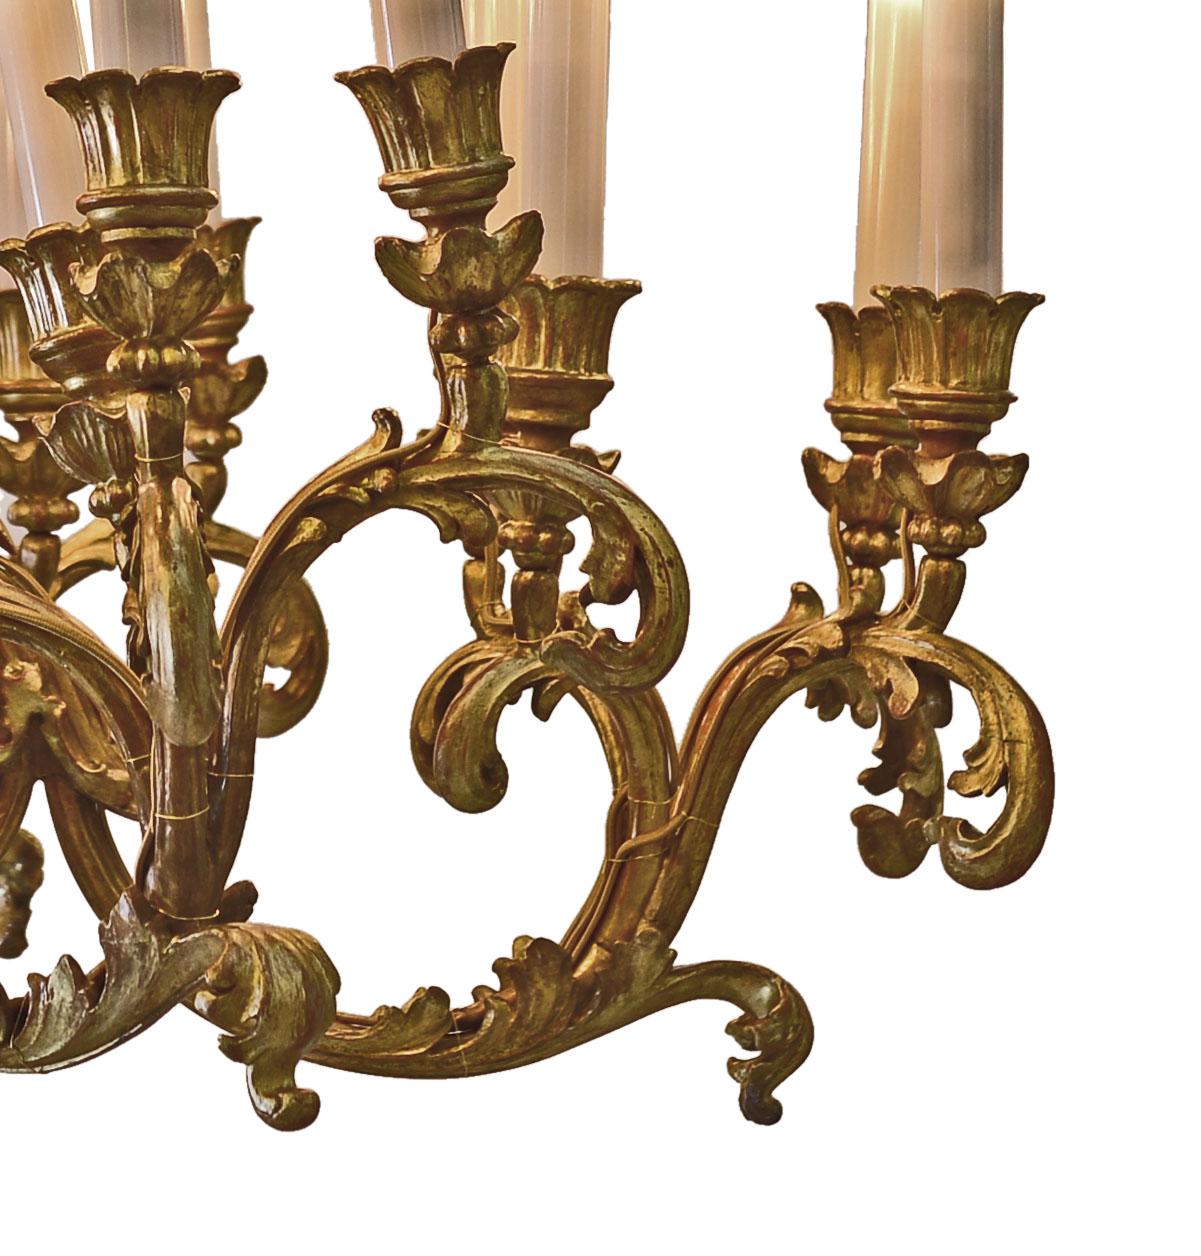 Hand-Crafted Original Rococo/Barock Chandelier, Limewood, 24 Flames, Perfectly Renovated For Sale